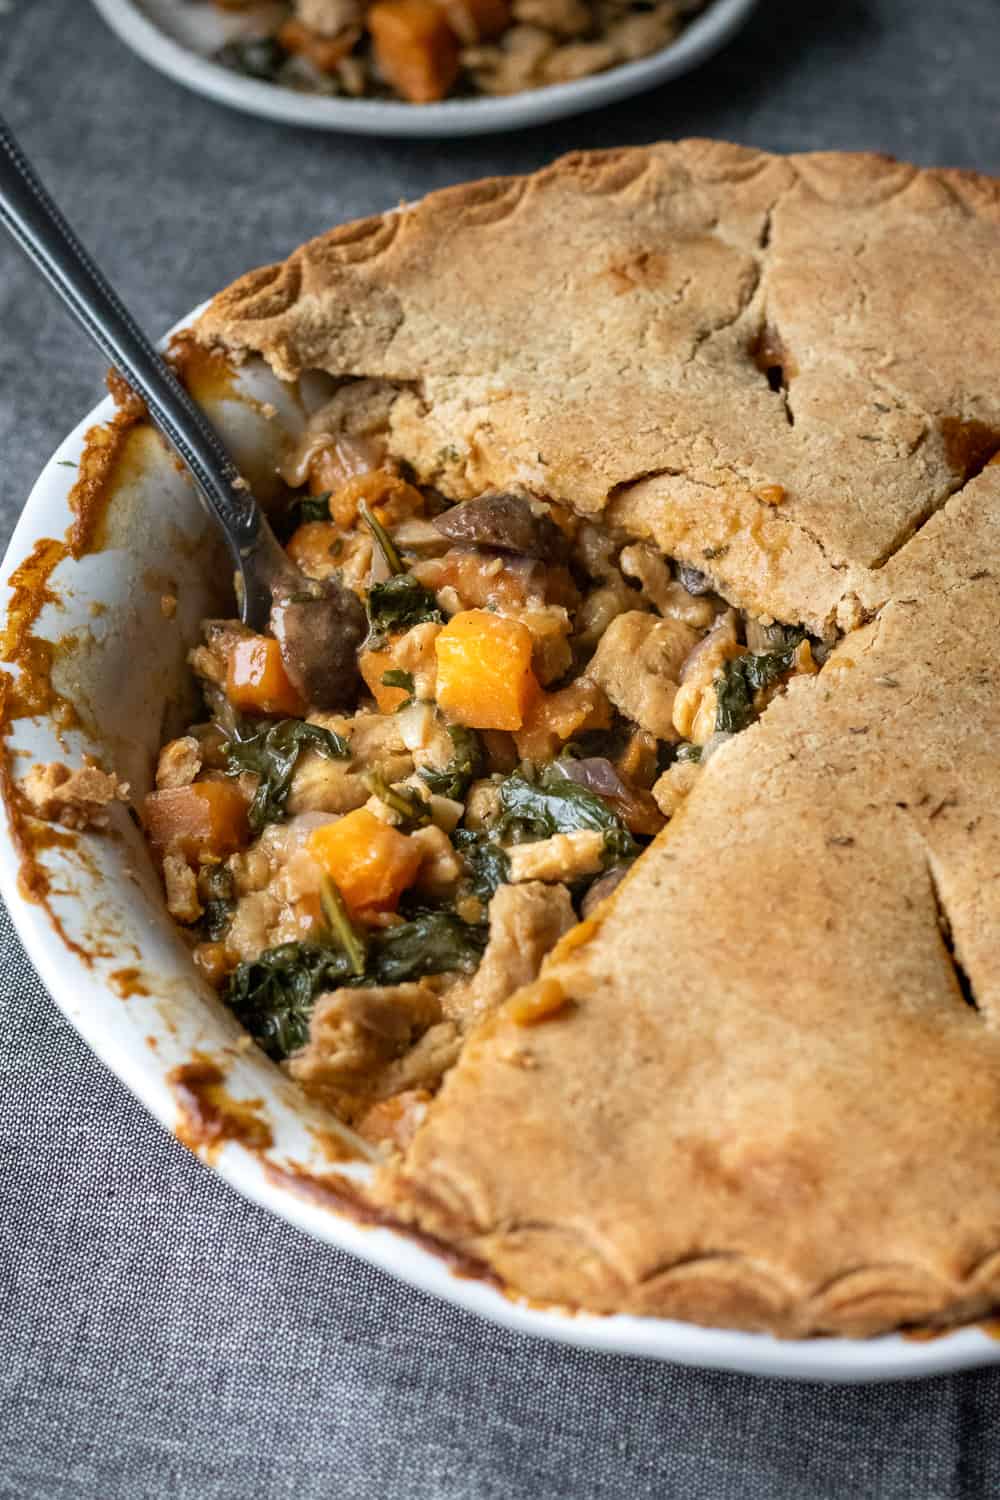 A spoon digging into vegan pot pie with a section of crust cut away to show the filling.